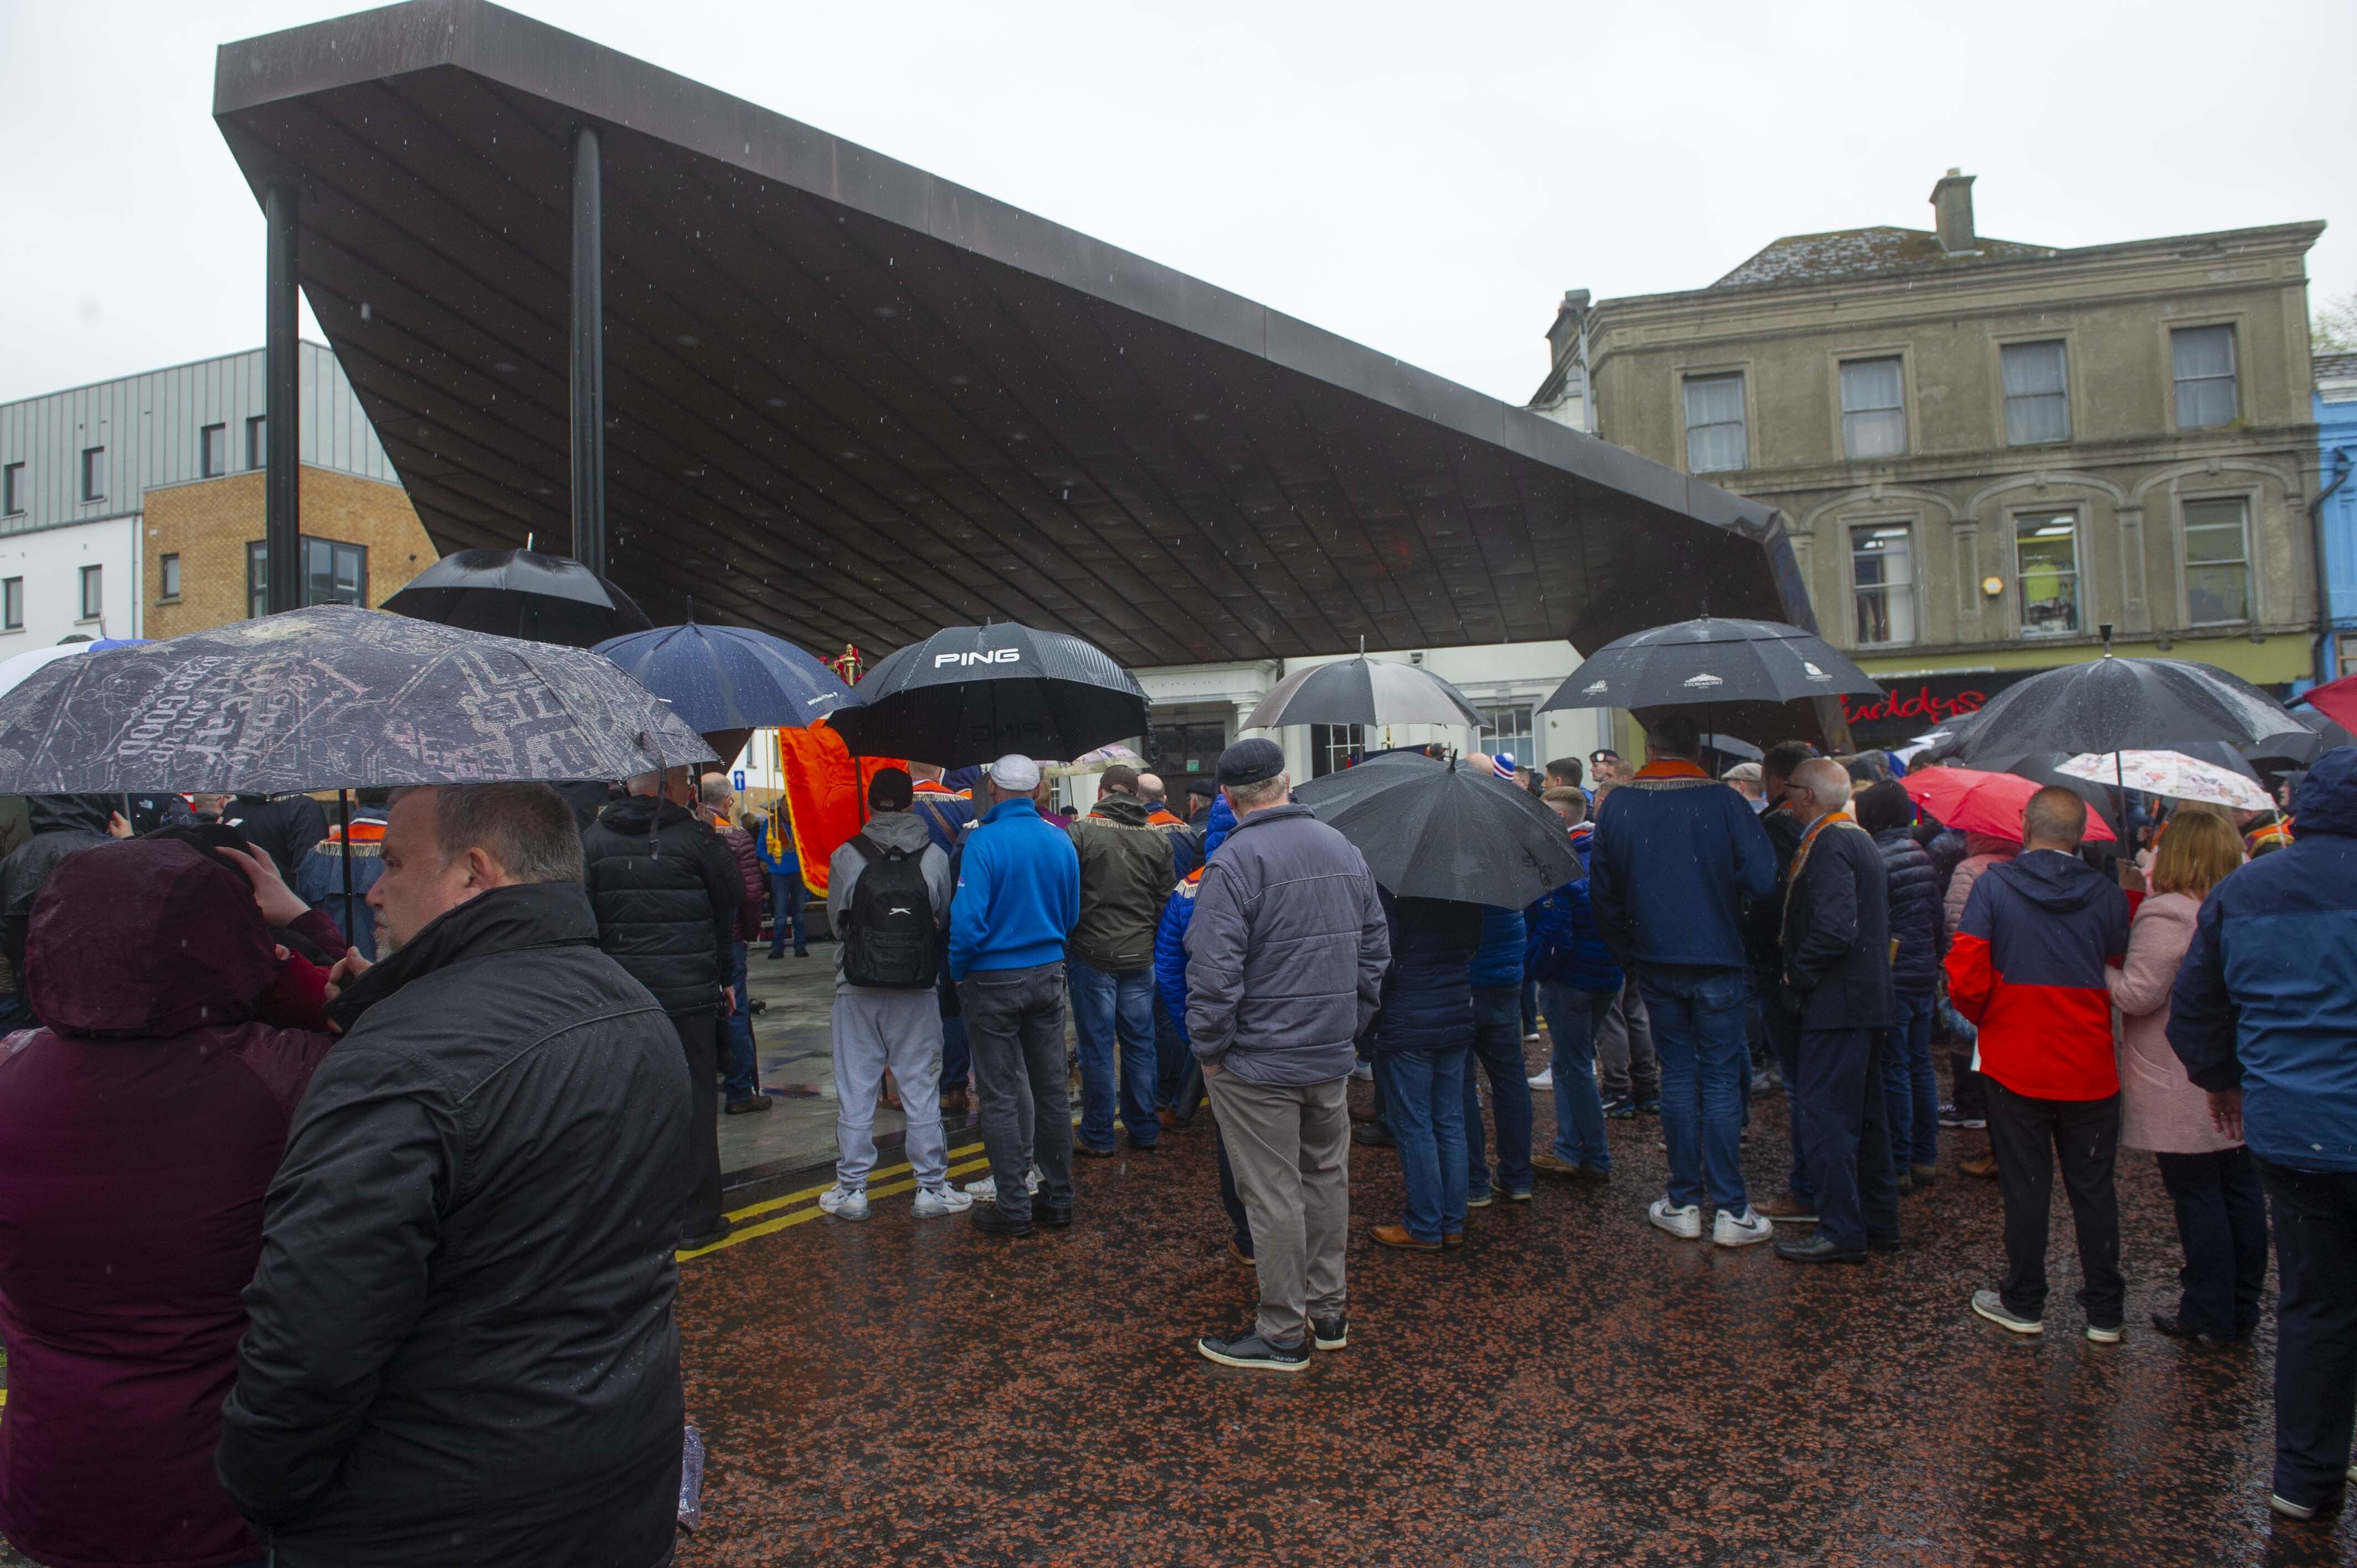 People attend the rally in Ballymena, County Antrim (Mark Marlow/PA)